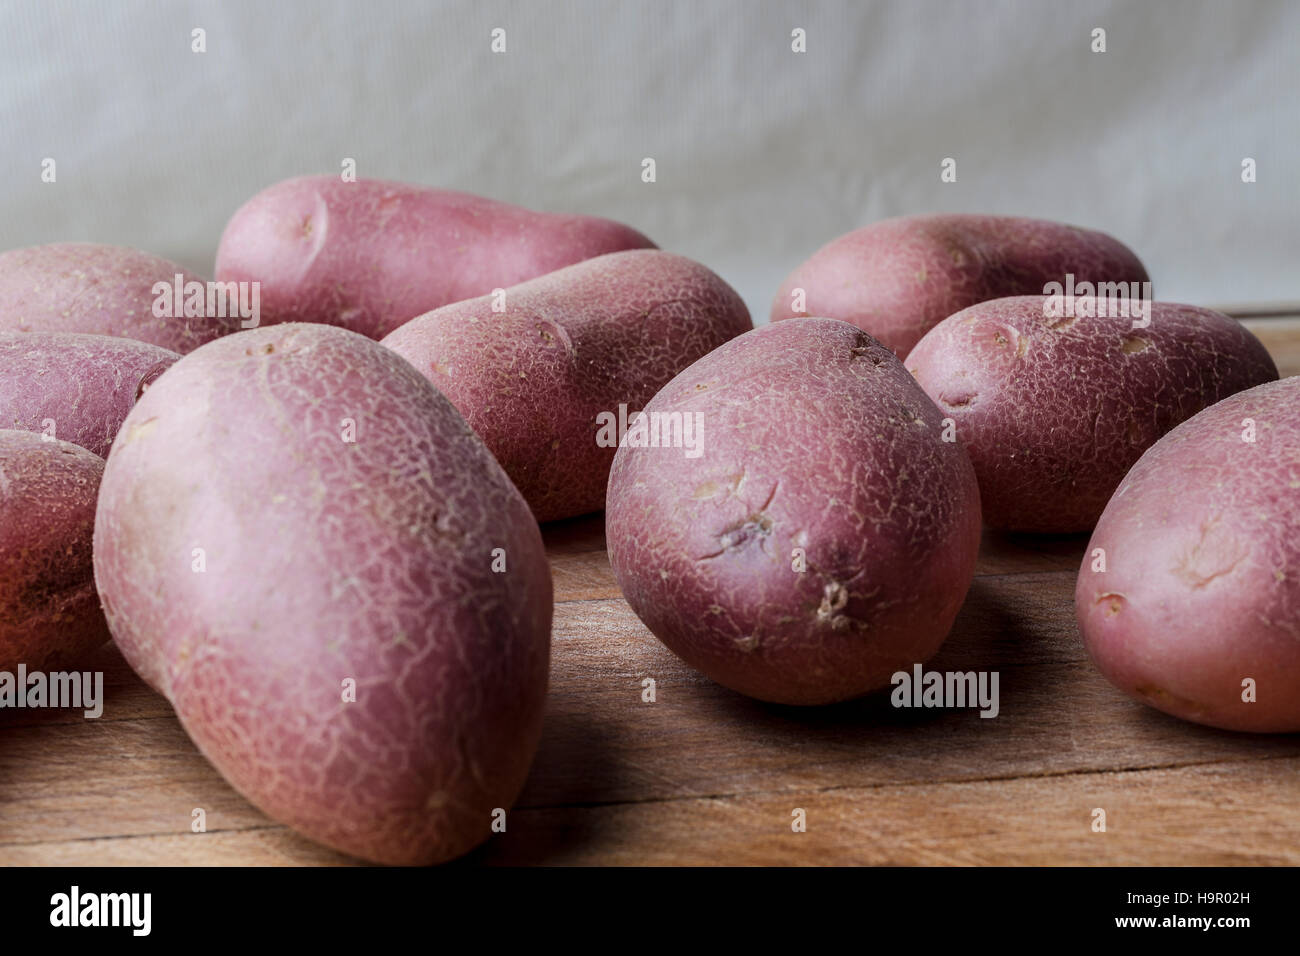 Red big imperfect potatoes on wooden cutting board Stock Photo